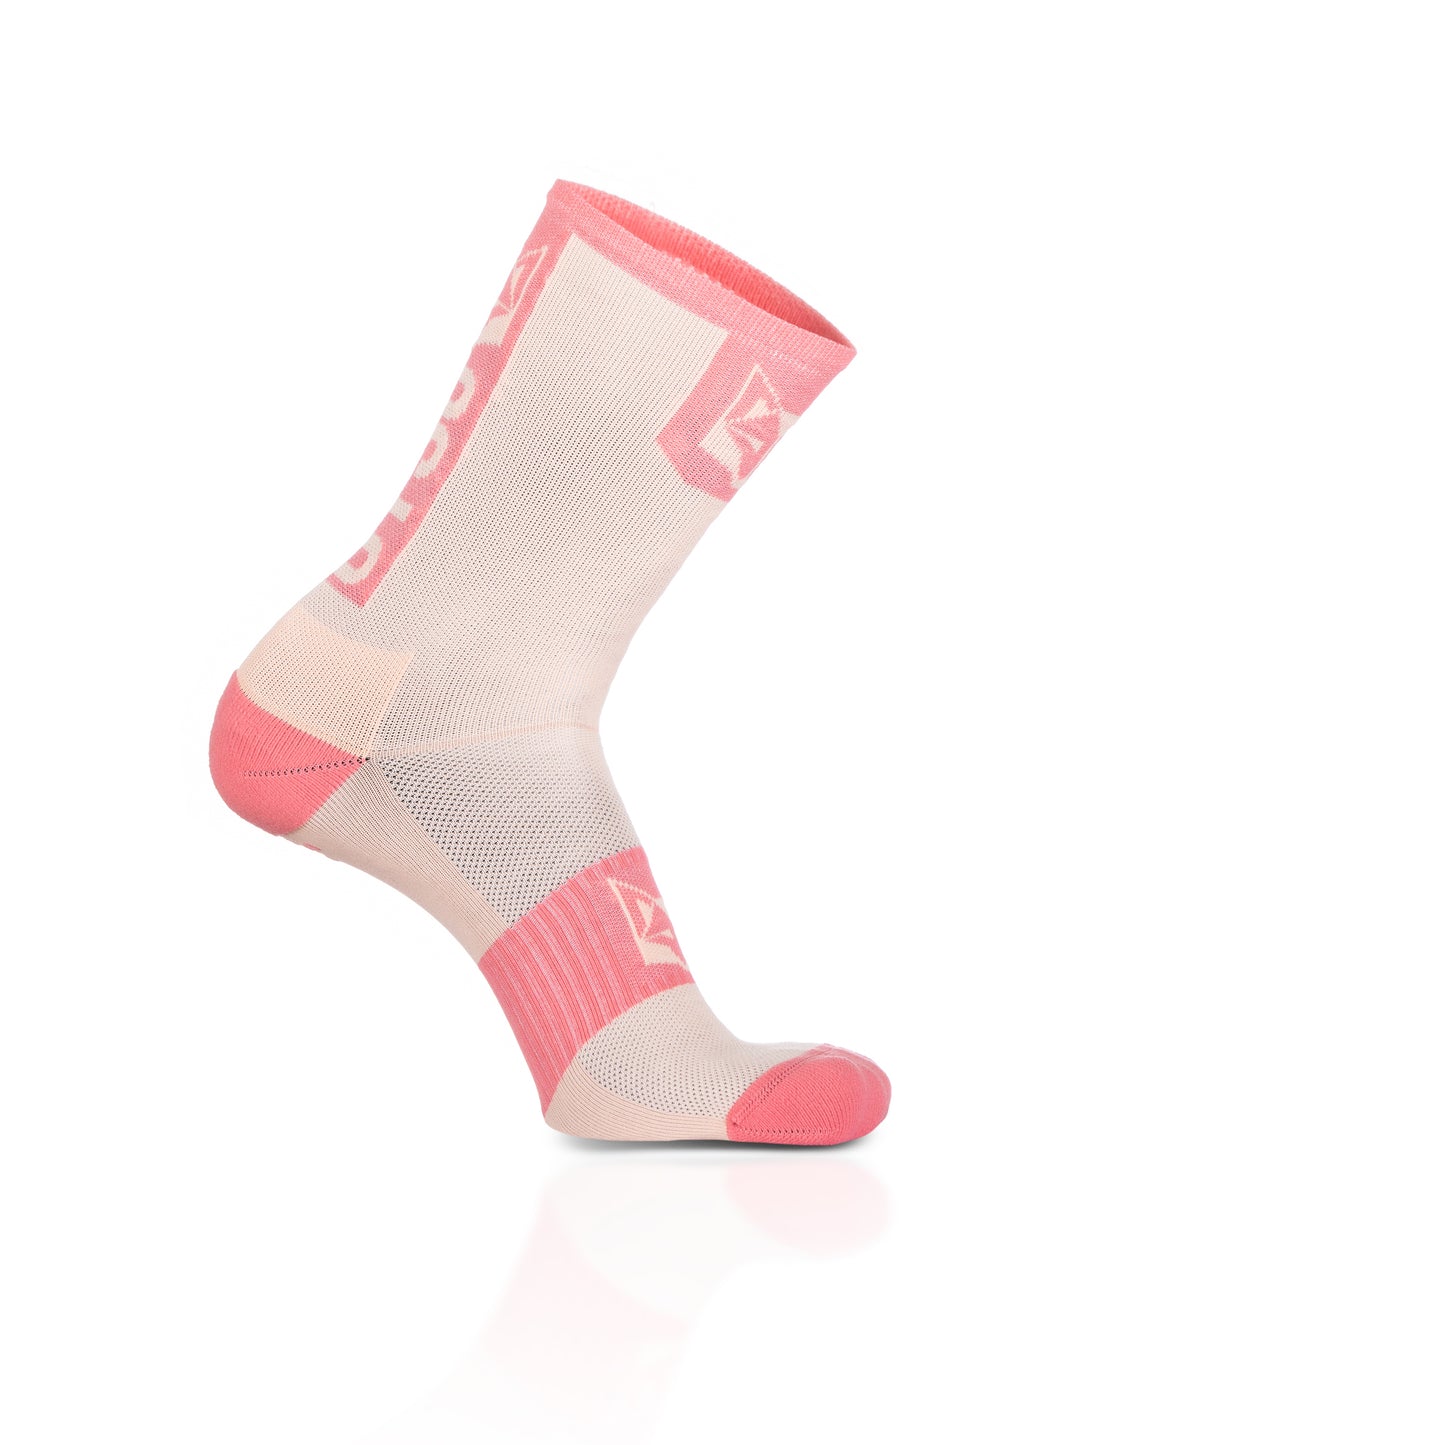 Calcetines de Ciclismo High Cut - Pink Coral & Pink Salmon (Outlet)